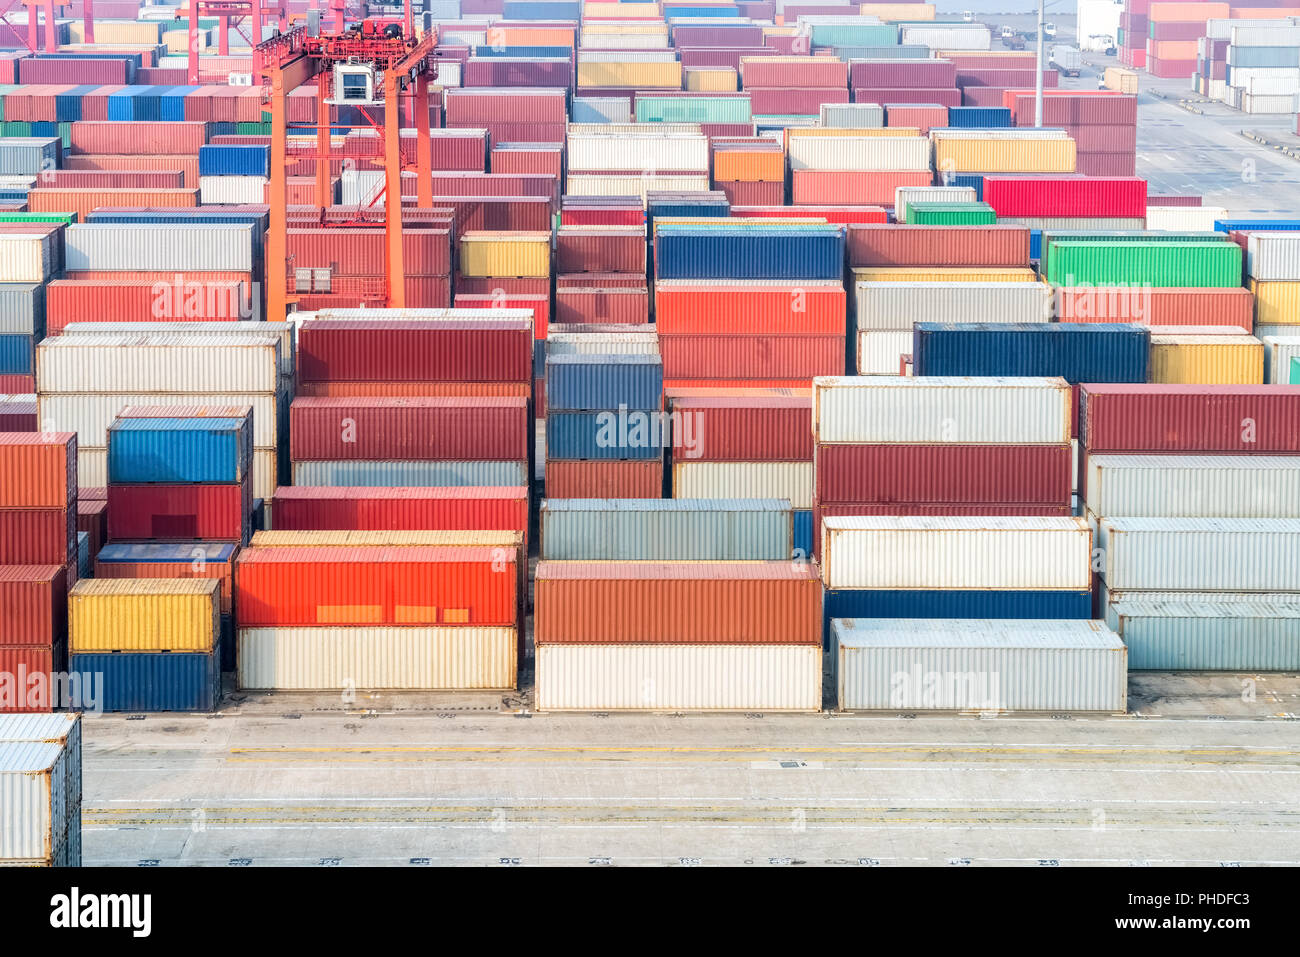 container depot background Stock Photo